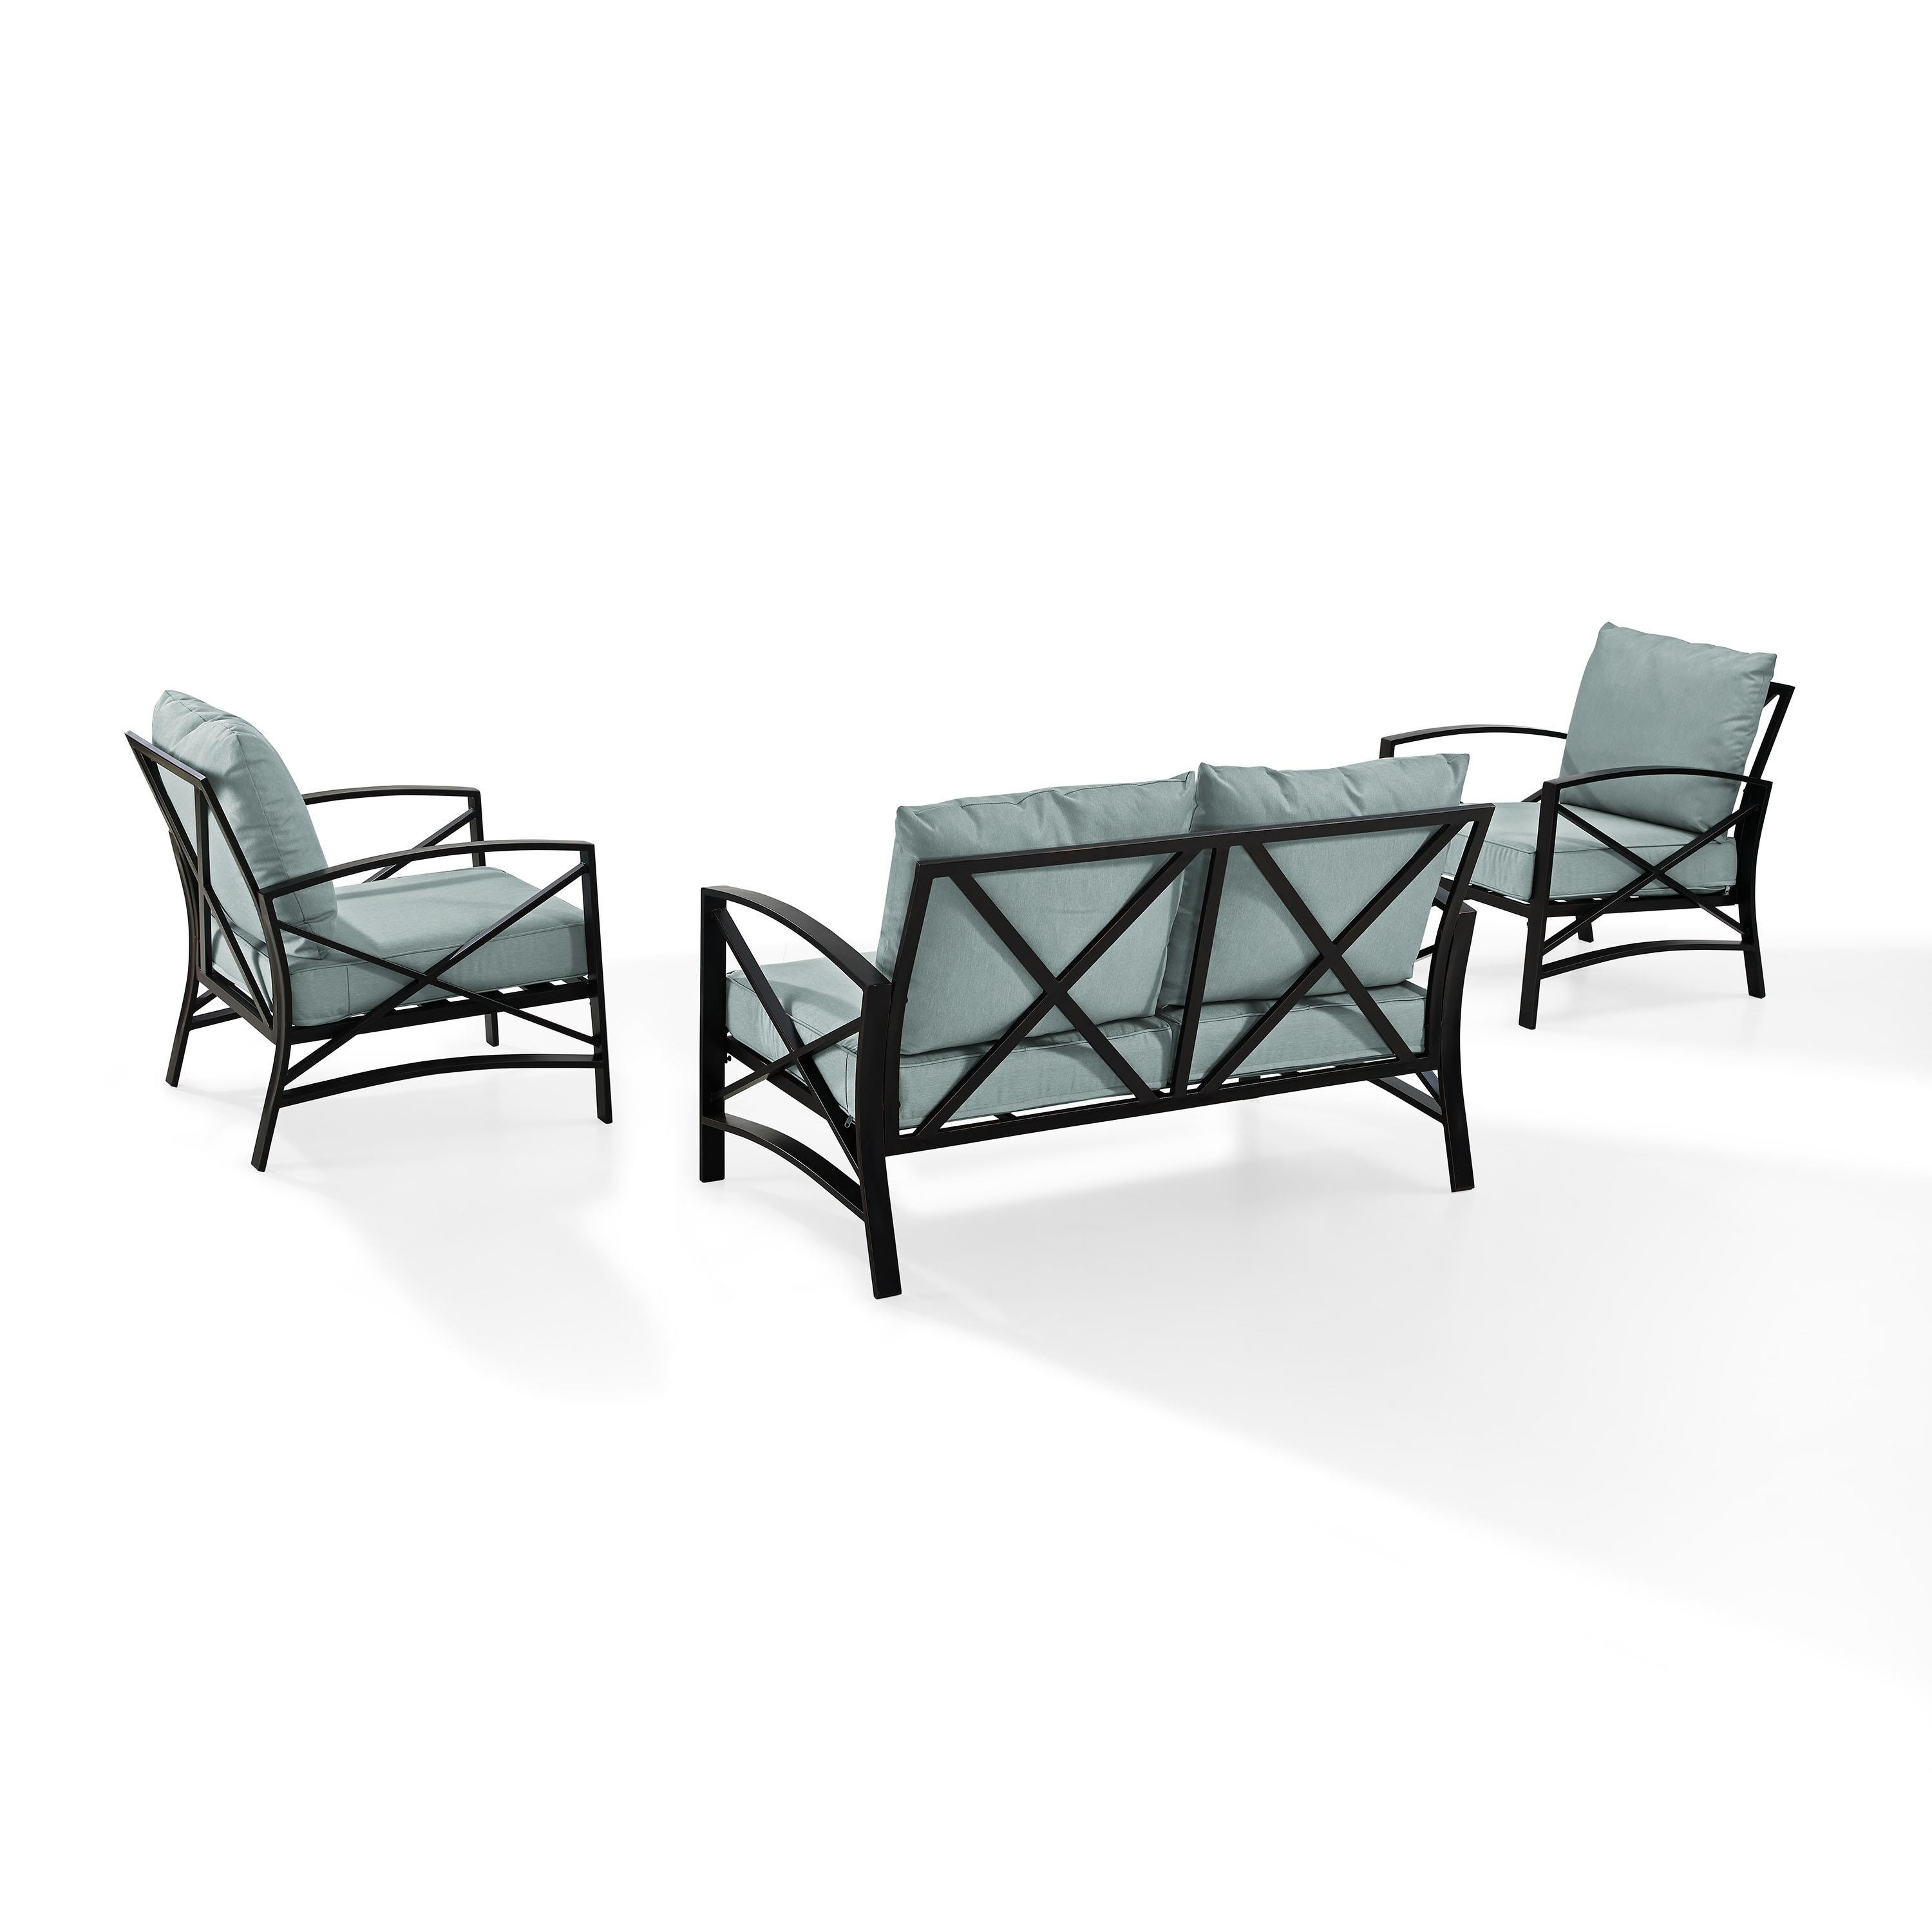 Crosley Furniture Kaplan 3 Pc Outdoor Seating Set With Mist Cushion - Loveseat, Two Outdoor Chairs - image 5 of 8